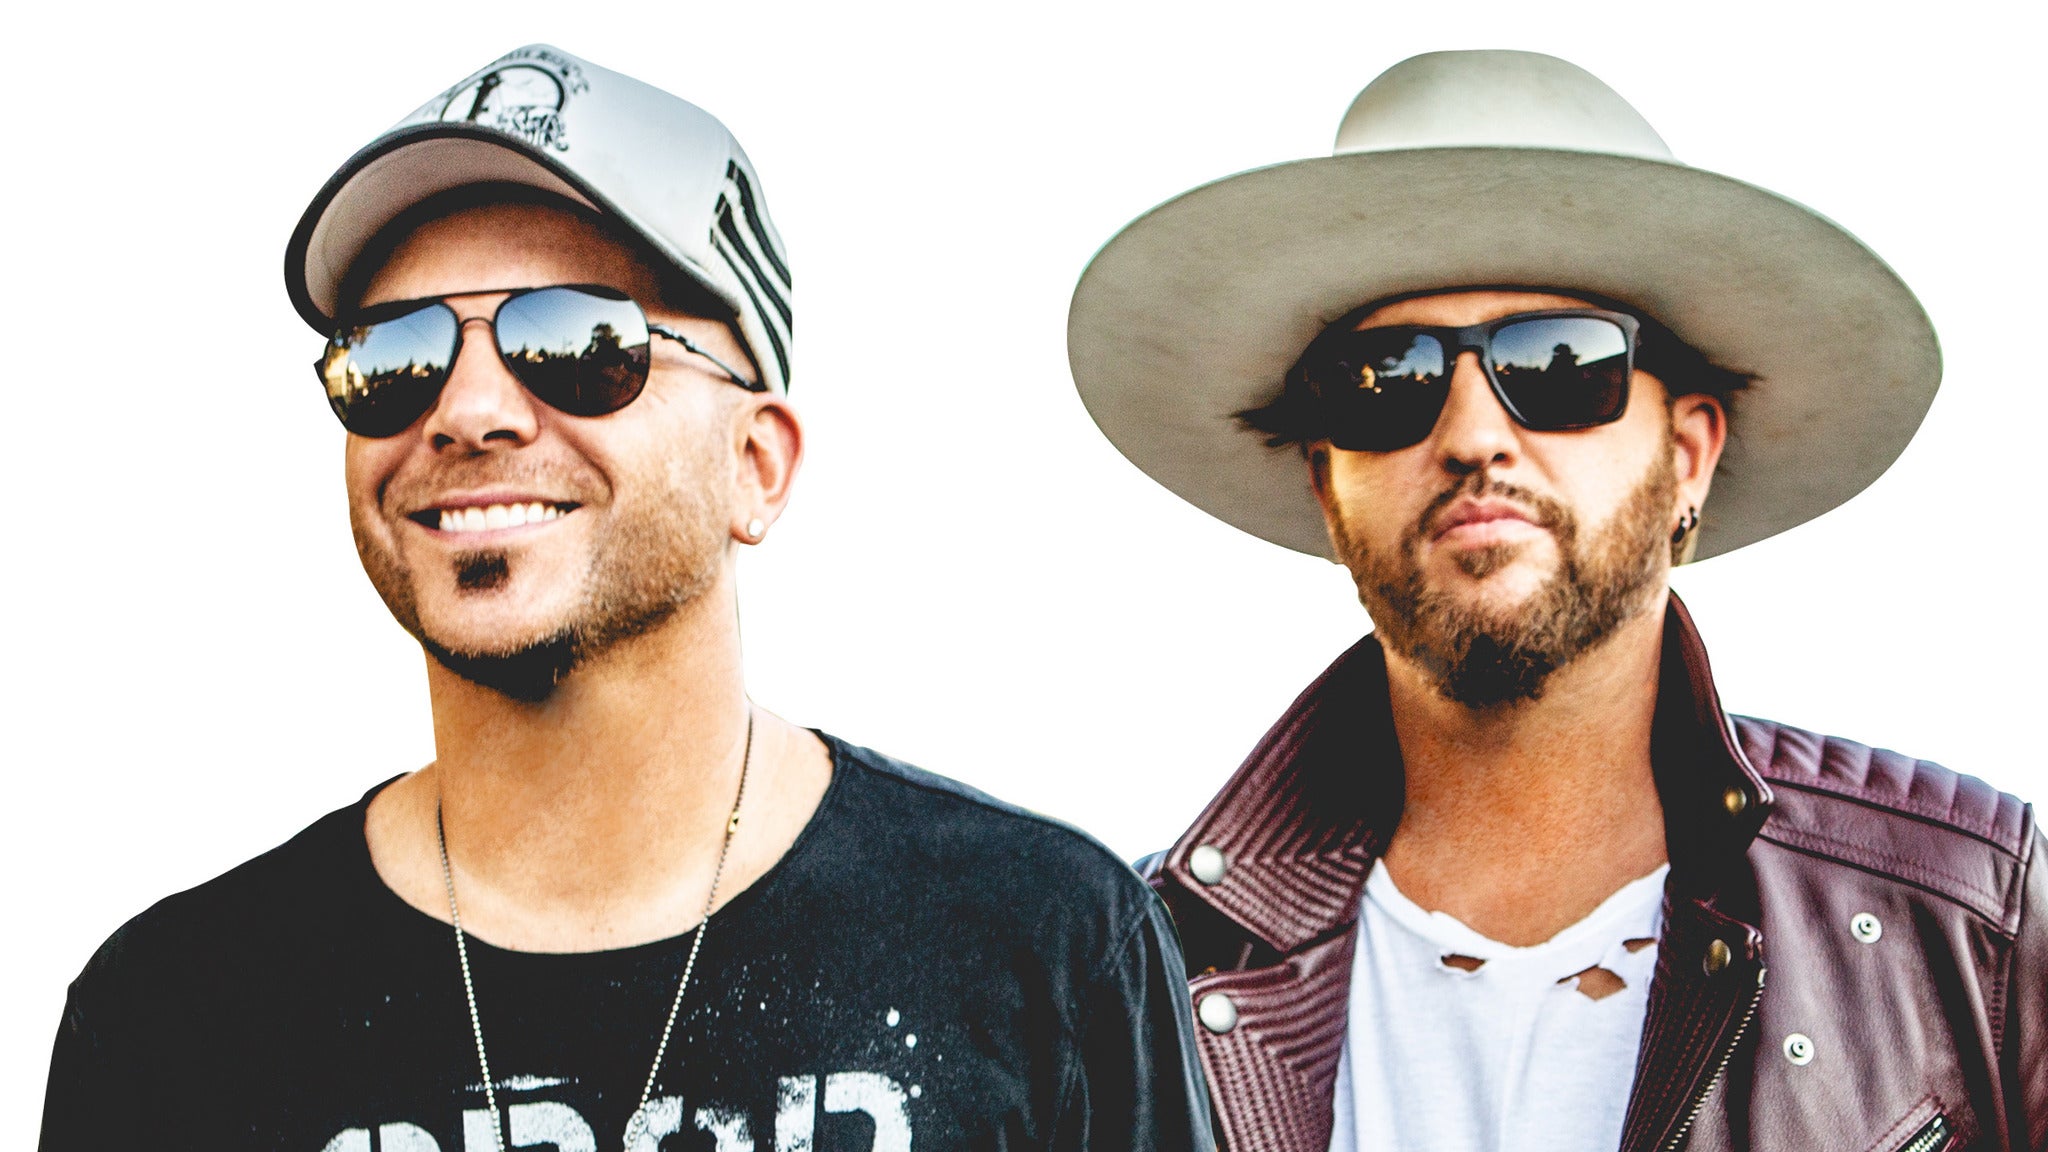 LOCASH in North Myrtle Beach promo photo for Official Platinum presale offer code